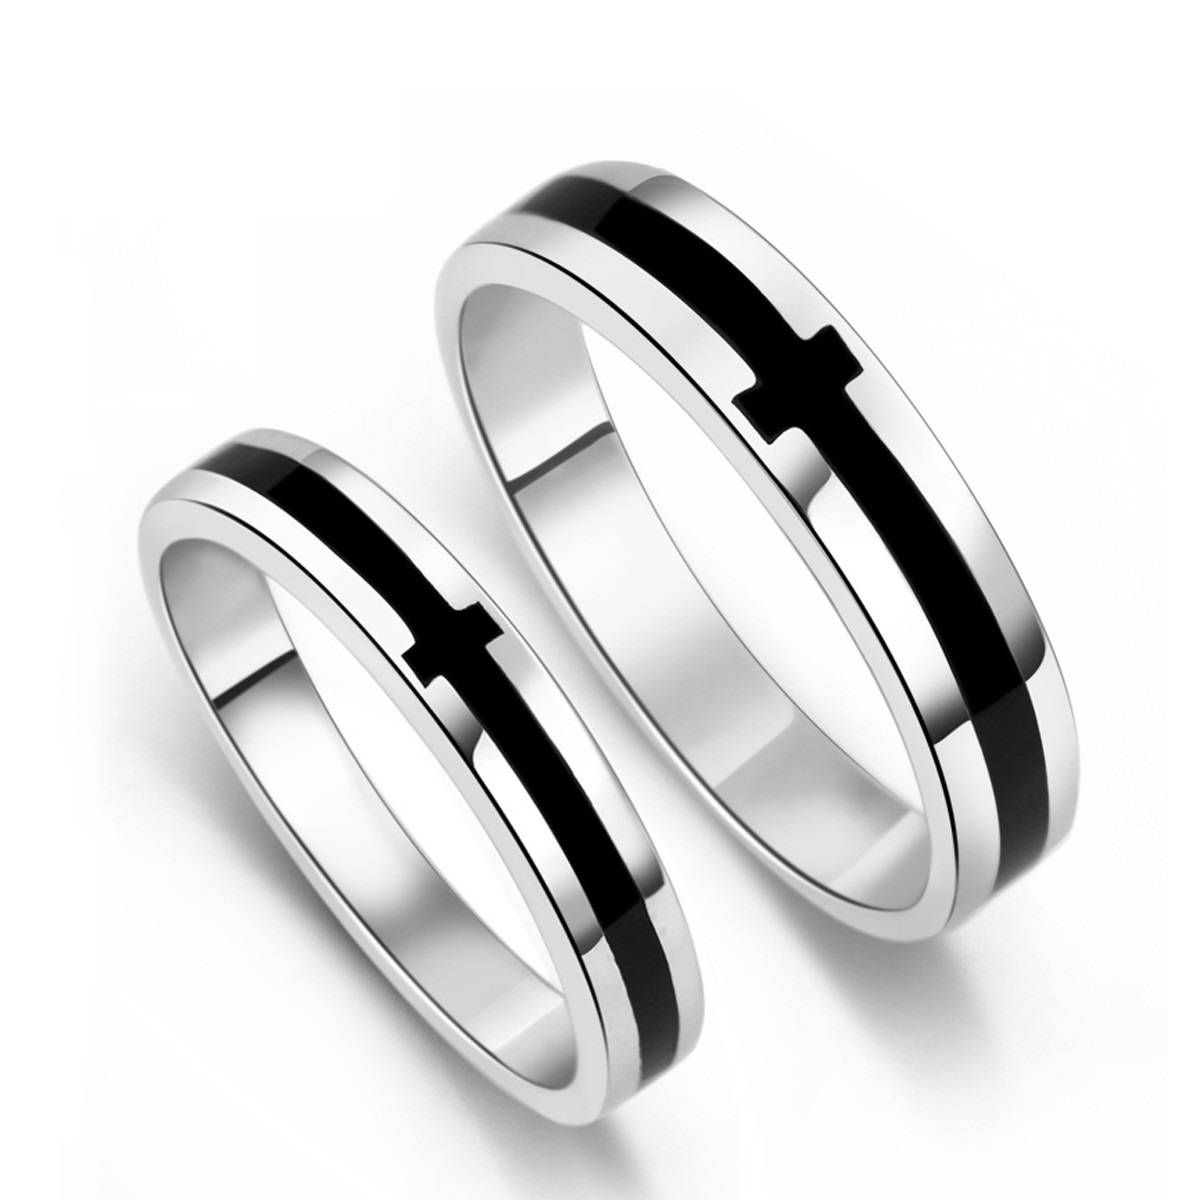 Black Onyx S925 Sterling Silver Mens Ladies Couple Promise Ring Throughout Most Current Couples Anniversary Rings (View 7 of 25)